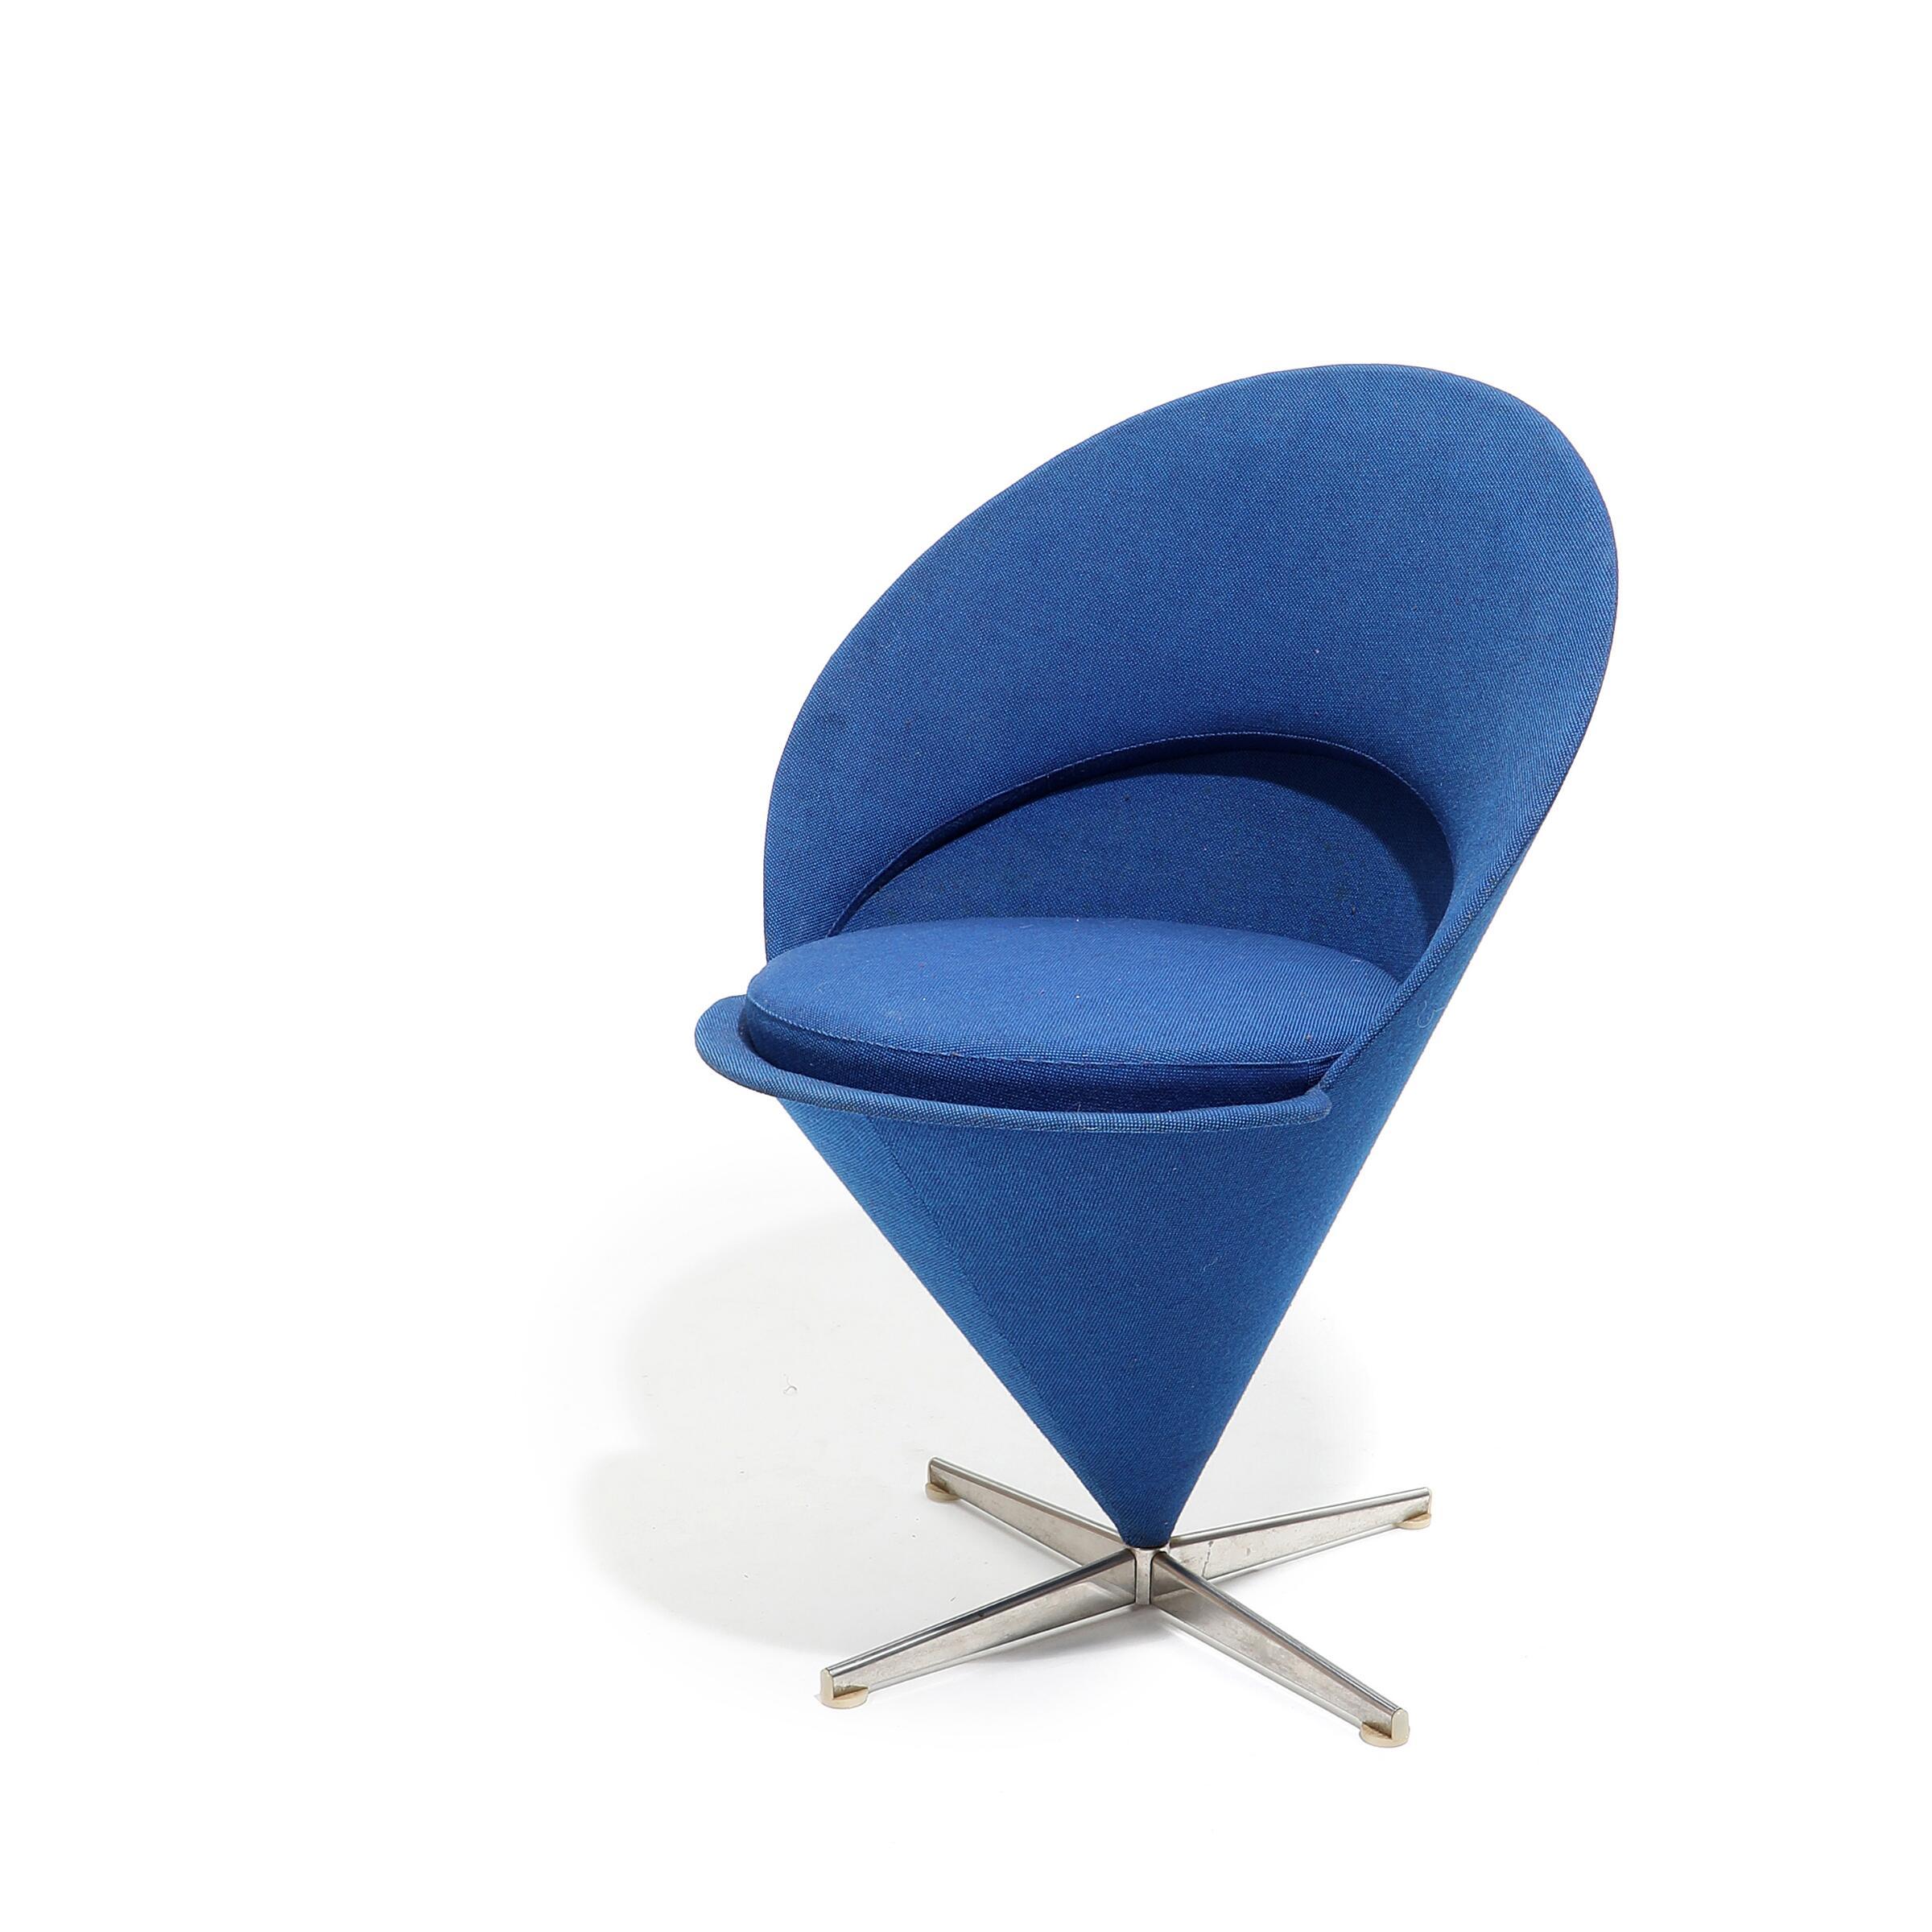 Danish Early Edition Verner Panton Blue Cone Chair Made by Plus Line, 1958 For Sale